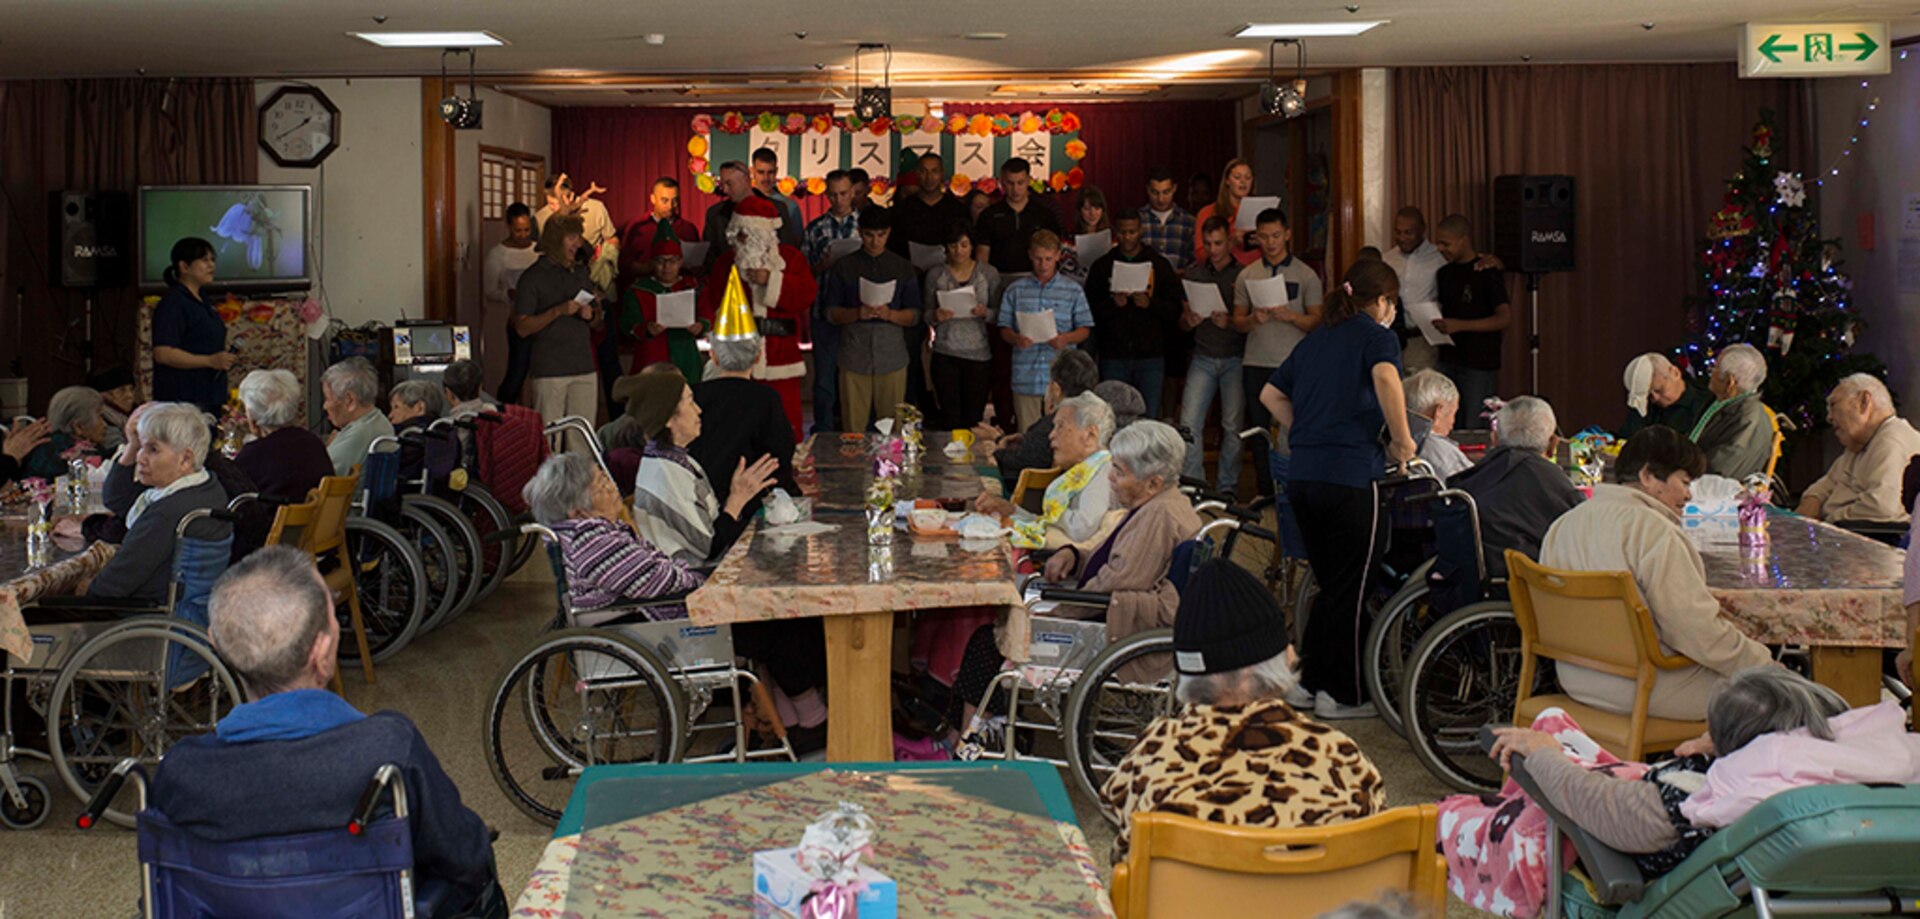 Marines with 7th Communication Battalion sing Christmas carols to the residents at Hikariga Oka Nursing Home during a Christmas Party thrown by the nursing home for the Marines at Hikariga Oka Nursing Home in Kin Town, Okinawa, Japan, Dec. 18, 2015.The nursing home hosts the Christmas party annually to pay thanks for the battalion’s continual community relations projects. Since 1994 Marines with the battalion regularly volunteers regularly to help maintain the home’s grounds of the home and conduct organize routine cleanups and maintenance. The Marines are with 7th Comm. Bn., III Marine Expeditionary Force Headquarters Group, III MEF. 